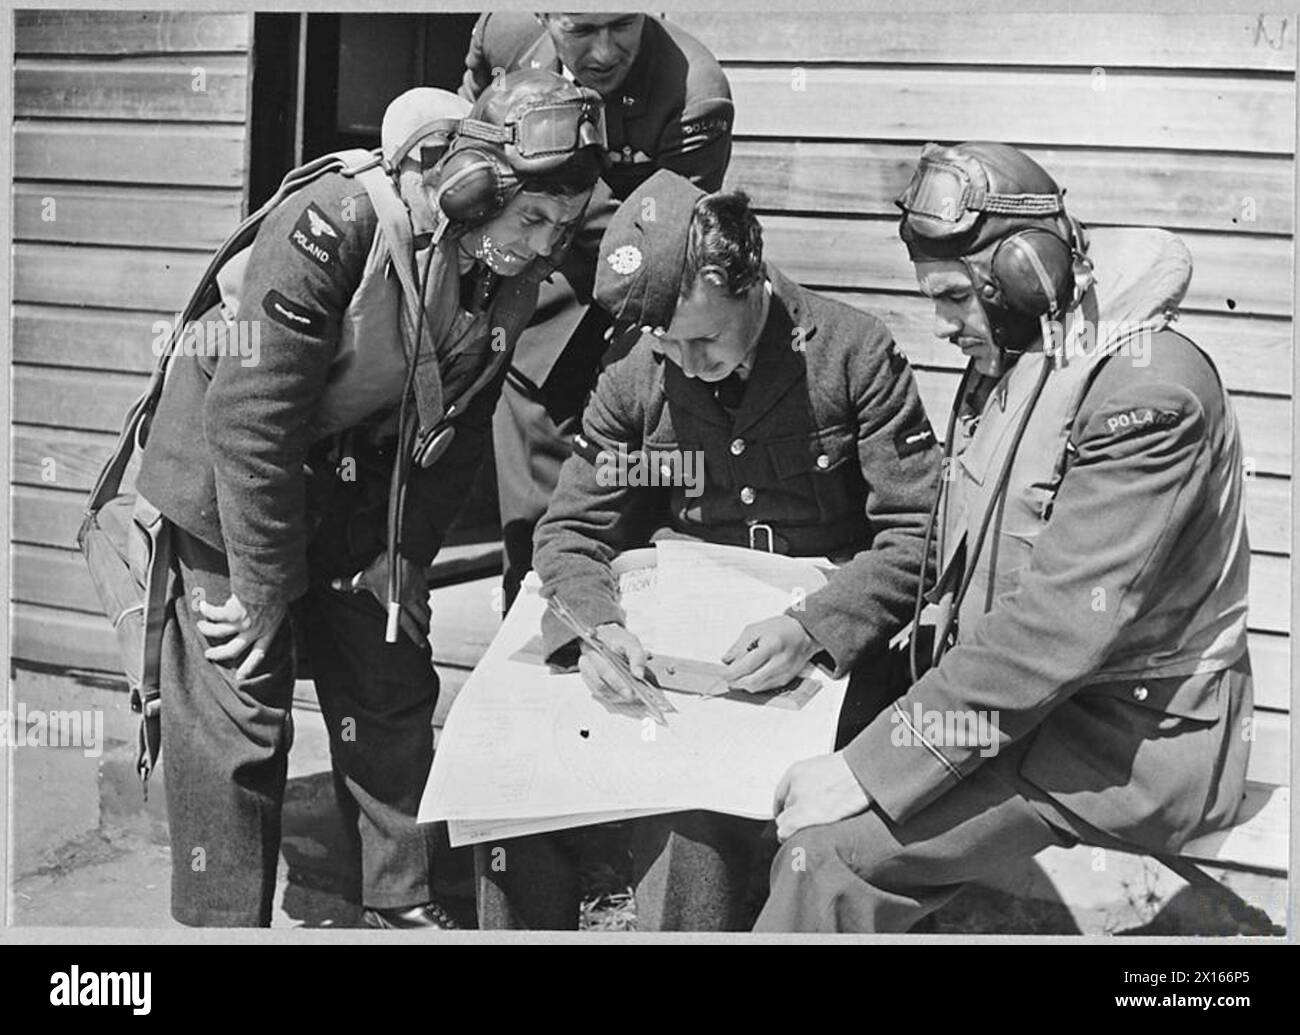 THE POLISH AIR FORCE IN BRITAIN, 1940-1947 - RAF instructor of No. 18 Operational Training Unit analysing the results of a bombing exercise over the Cardigan Bay with Polish trainee airmen (probably future members of No. 301 Bomber Squadron) at No. 9 Bombing and Gunnery School at RAF Penrhos, 14 July 1940. The exercise was carried on Fairey Battle Mk. I light bombers.No. 18 OTU was formed from the Polish Training Unit in No. 6 Group, Bomber Command, in June 1940 to train light bomber crews for Polish operational squadrons Polish Air Force, Polish Air Force, 301 'Land of Pomerania' Bomber Squad Stock Photo